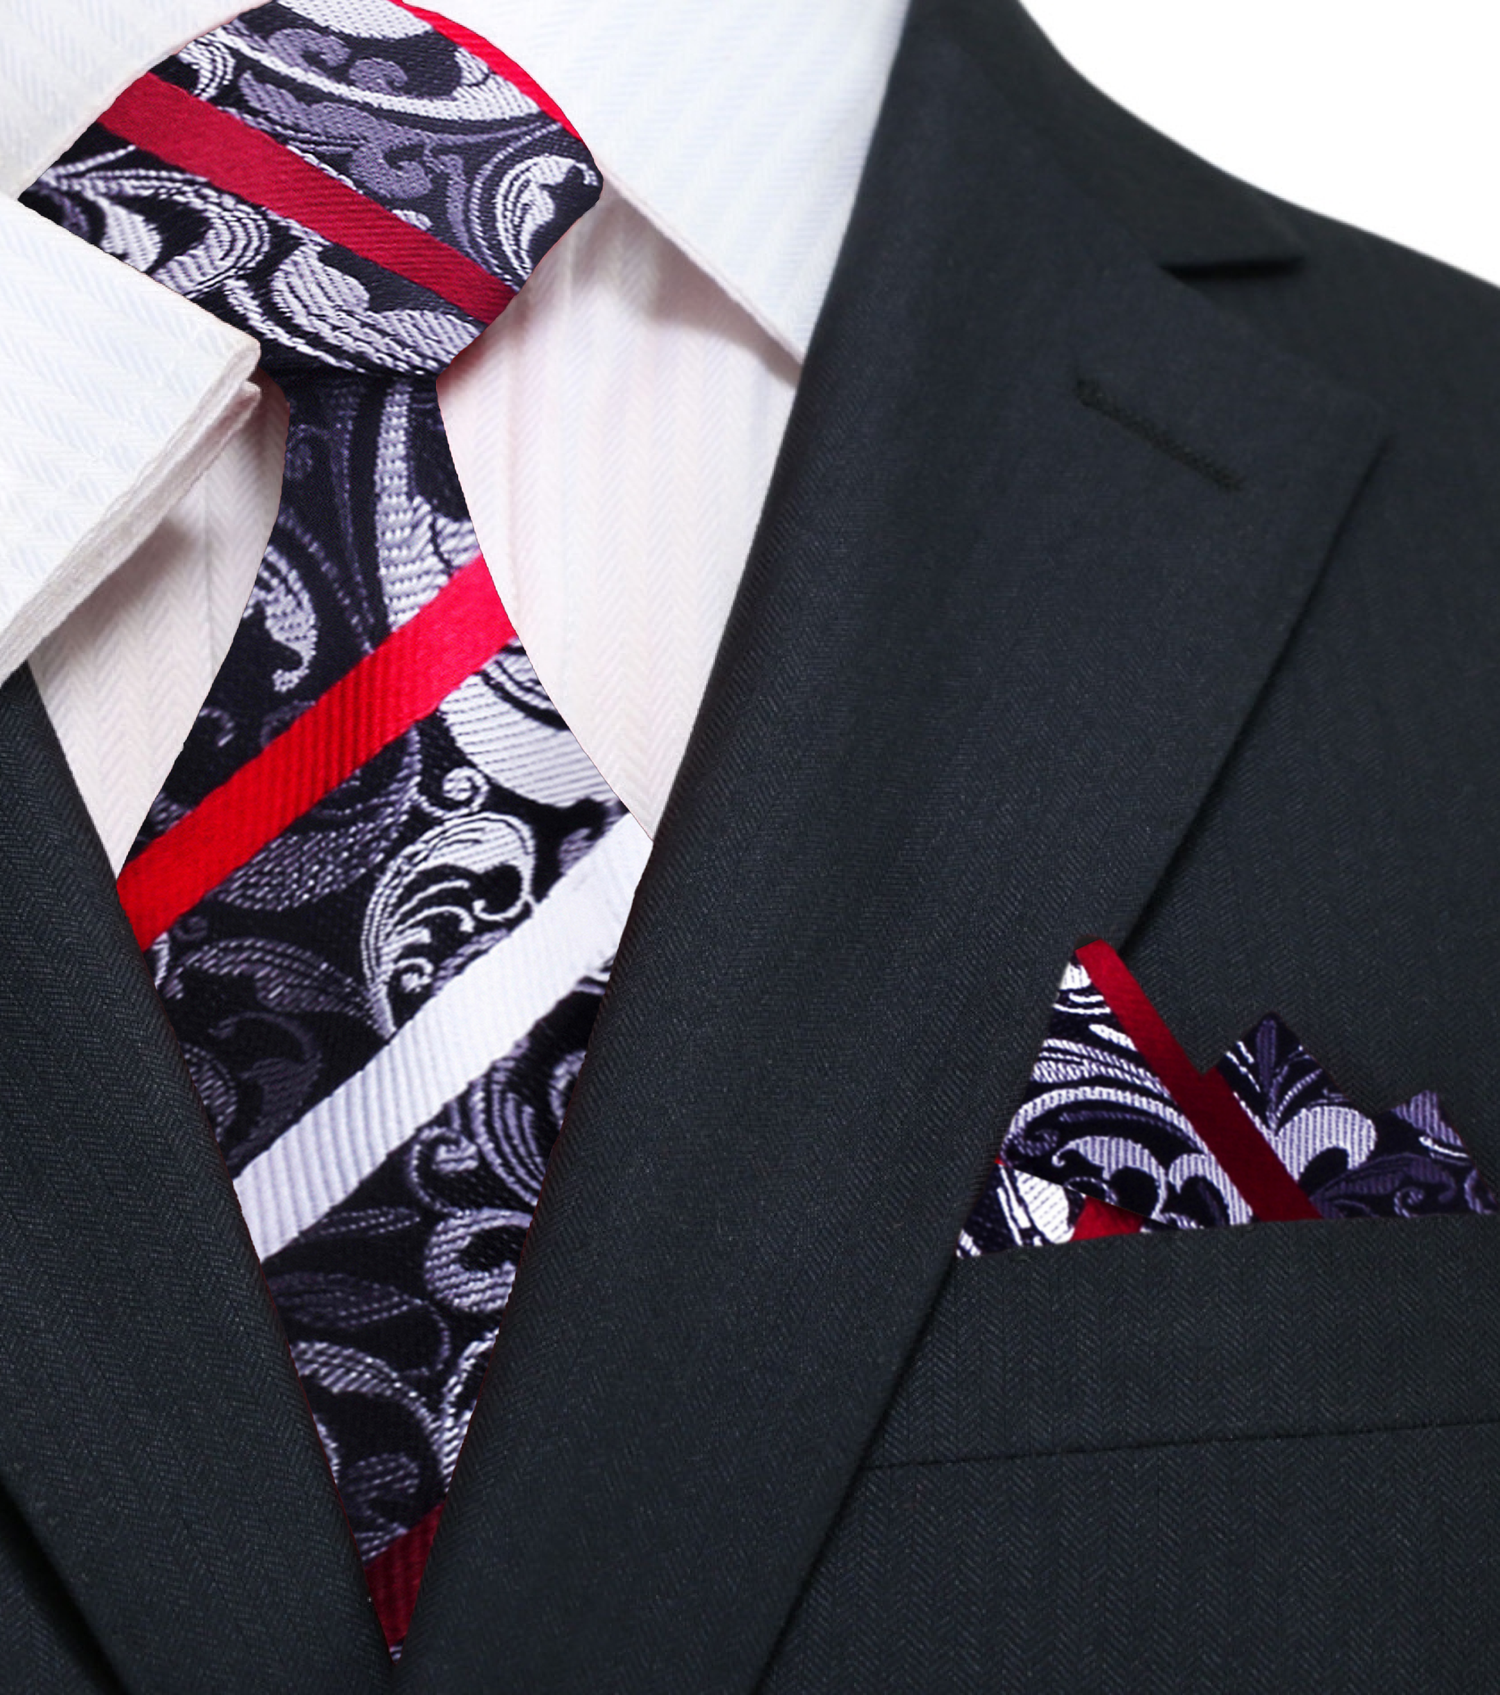   Grey, Black, White and Red Floral with Stripe Tie and Pocket Square